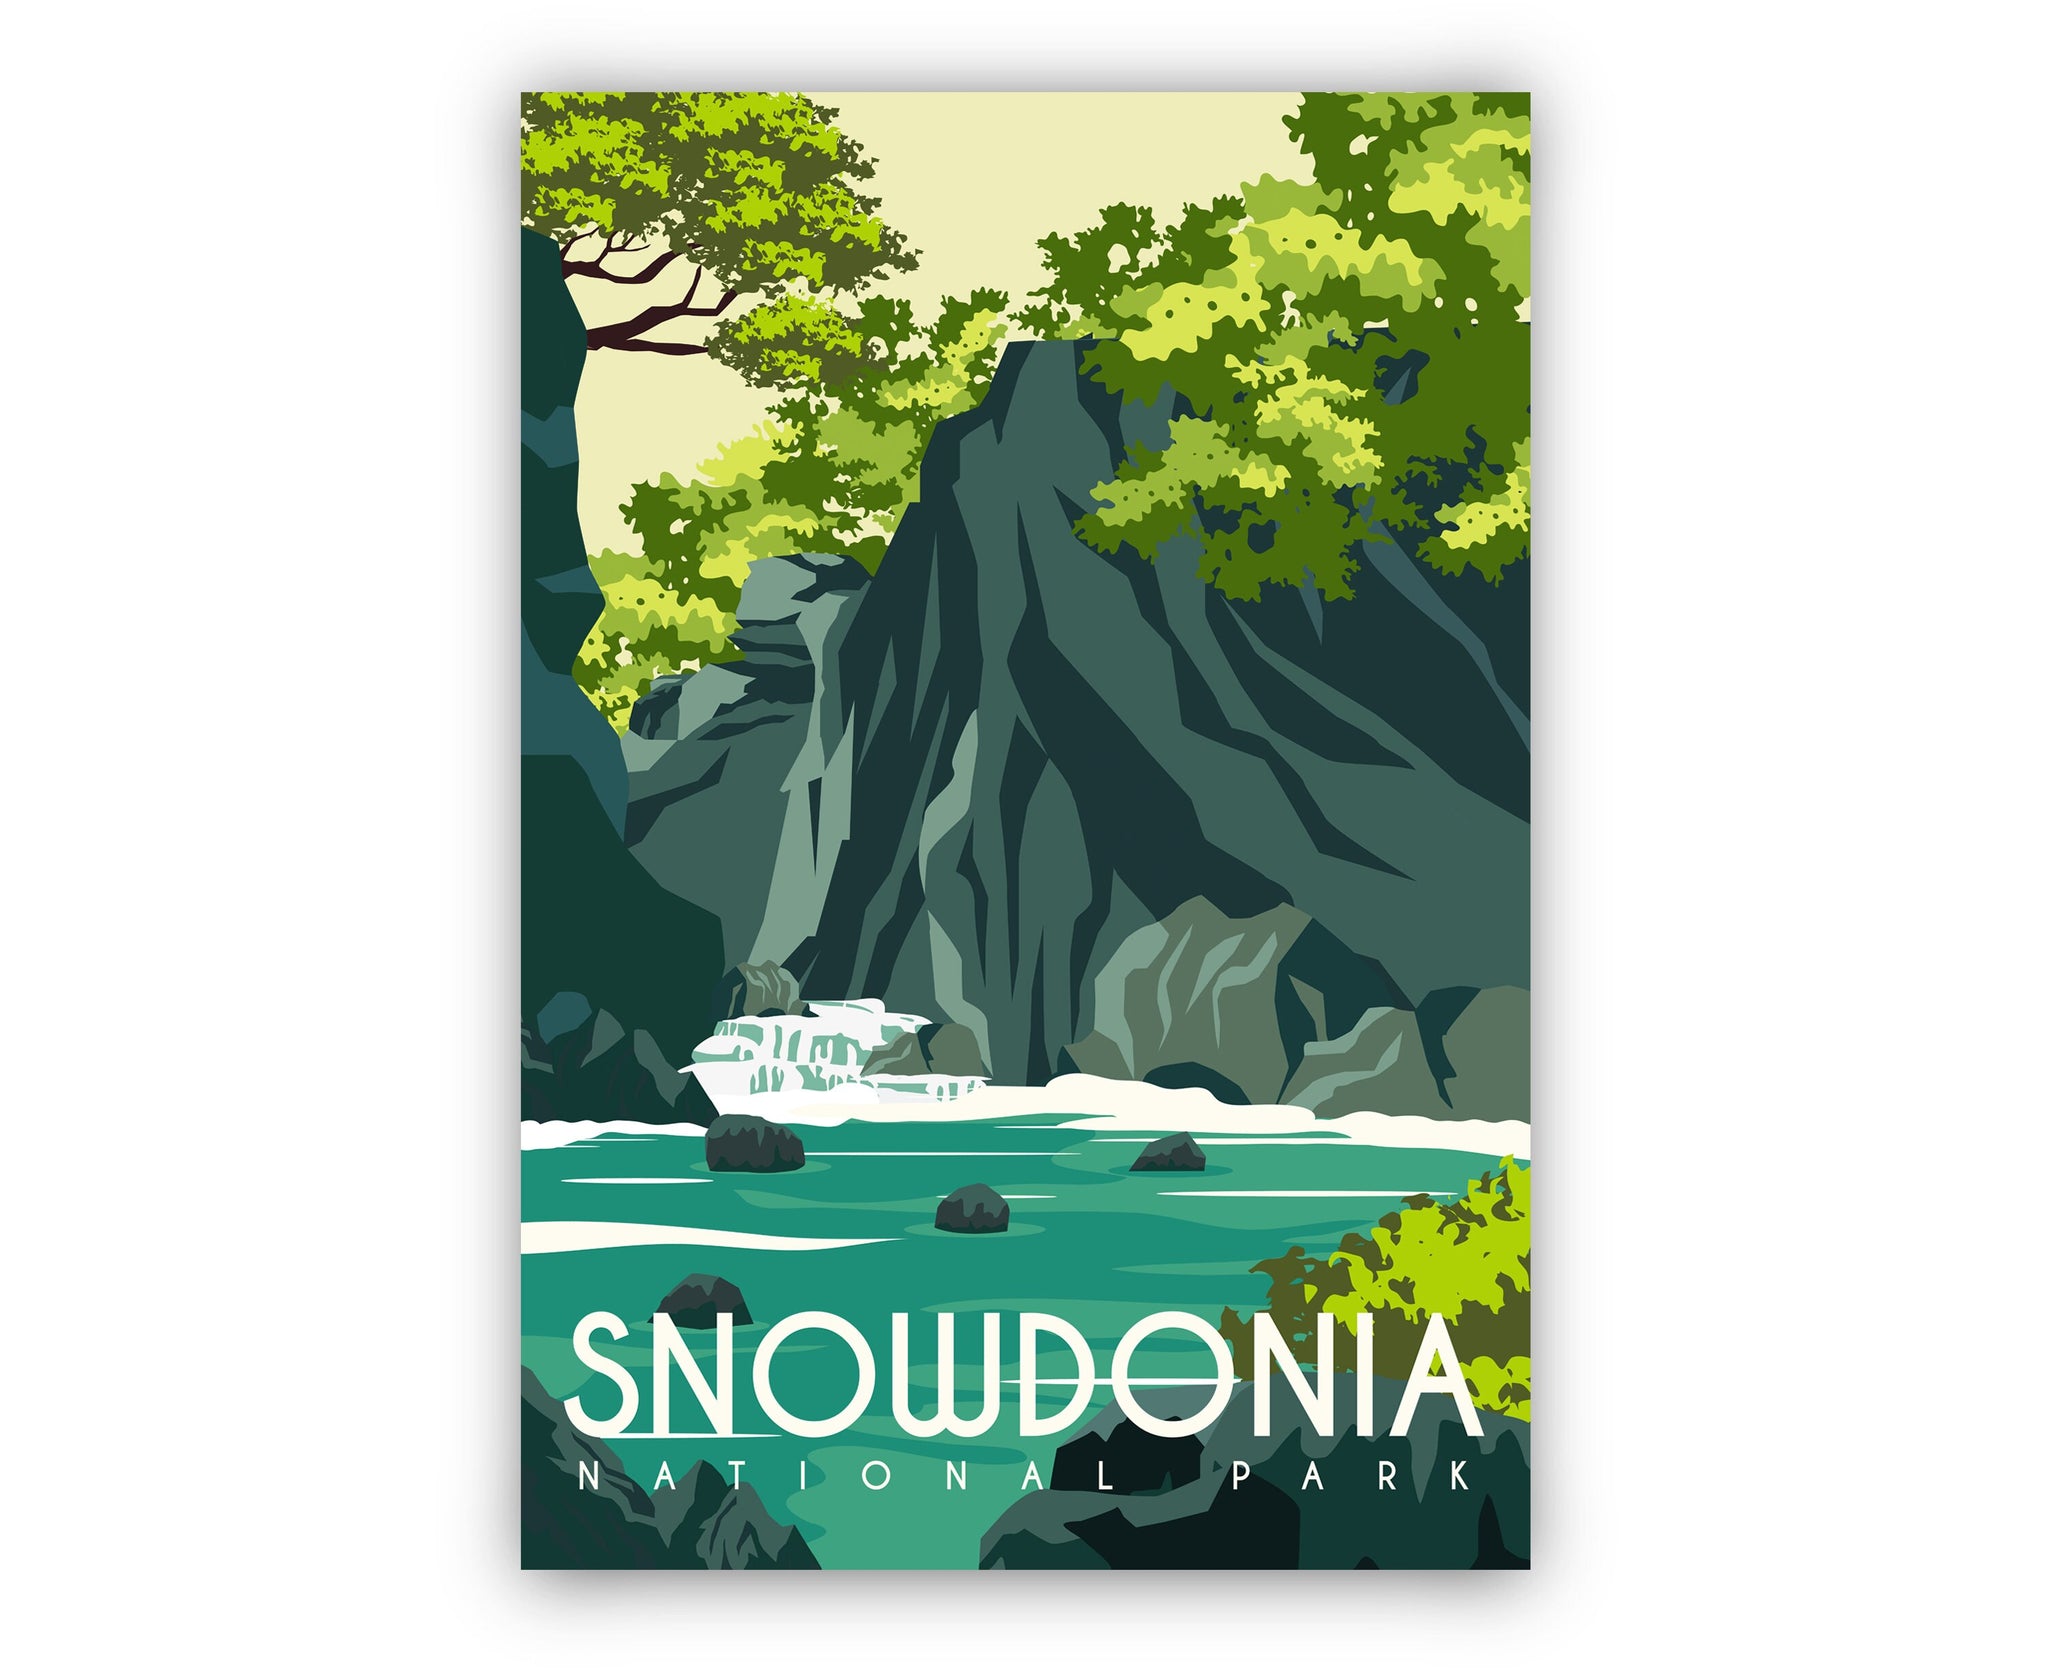 SNOWDONIA travel poster, Snowdonia cityscape poster print, Snowdonia national park poster wall art, Home wall art, Office wall decorations